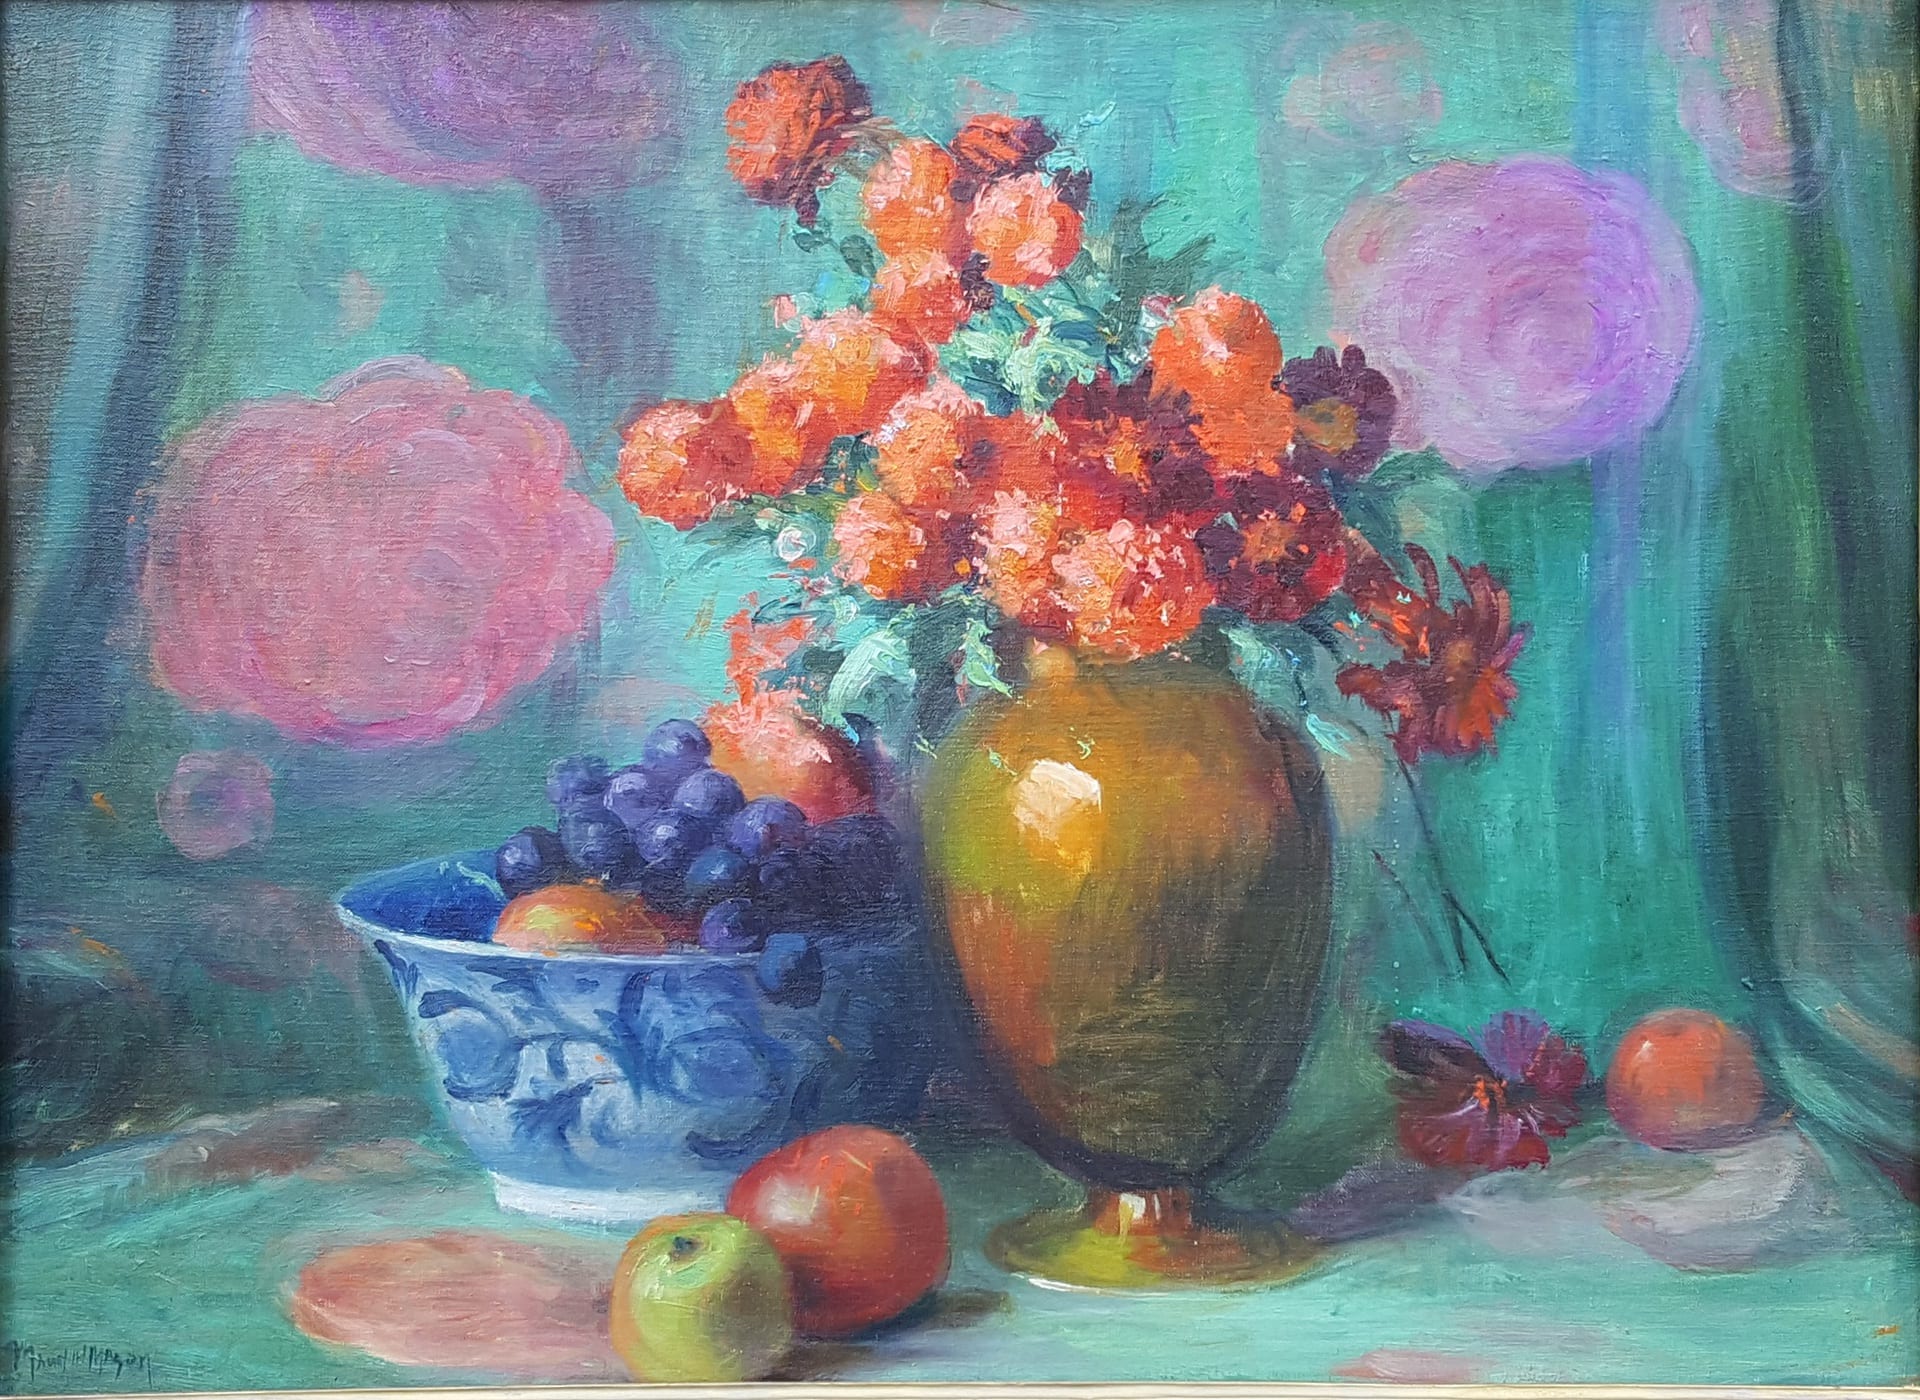 Mason's Floral Still Life with Copper Vase. Red Flowers, copper vase, blue bowl containing blueberries and apples.